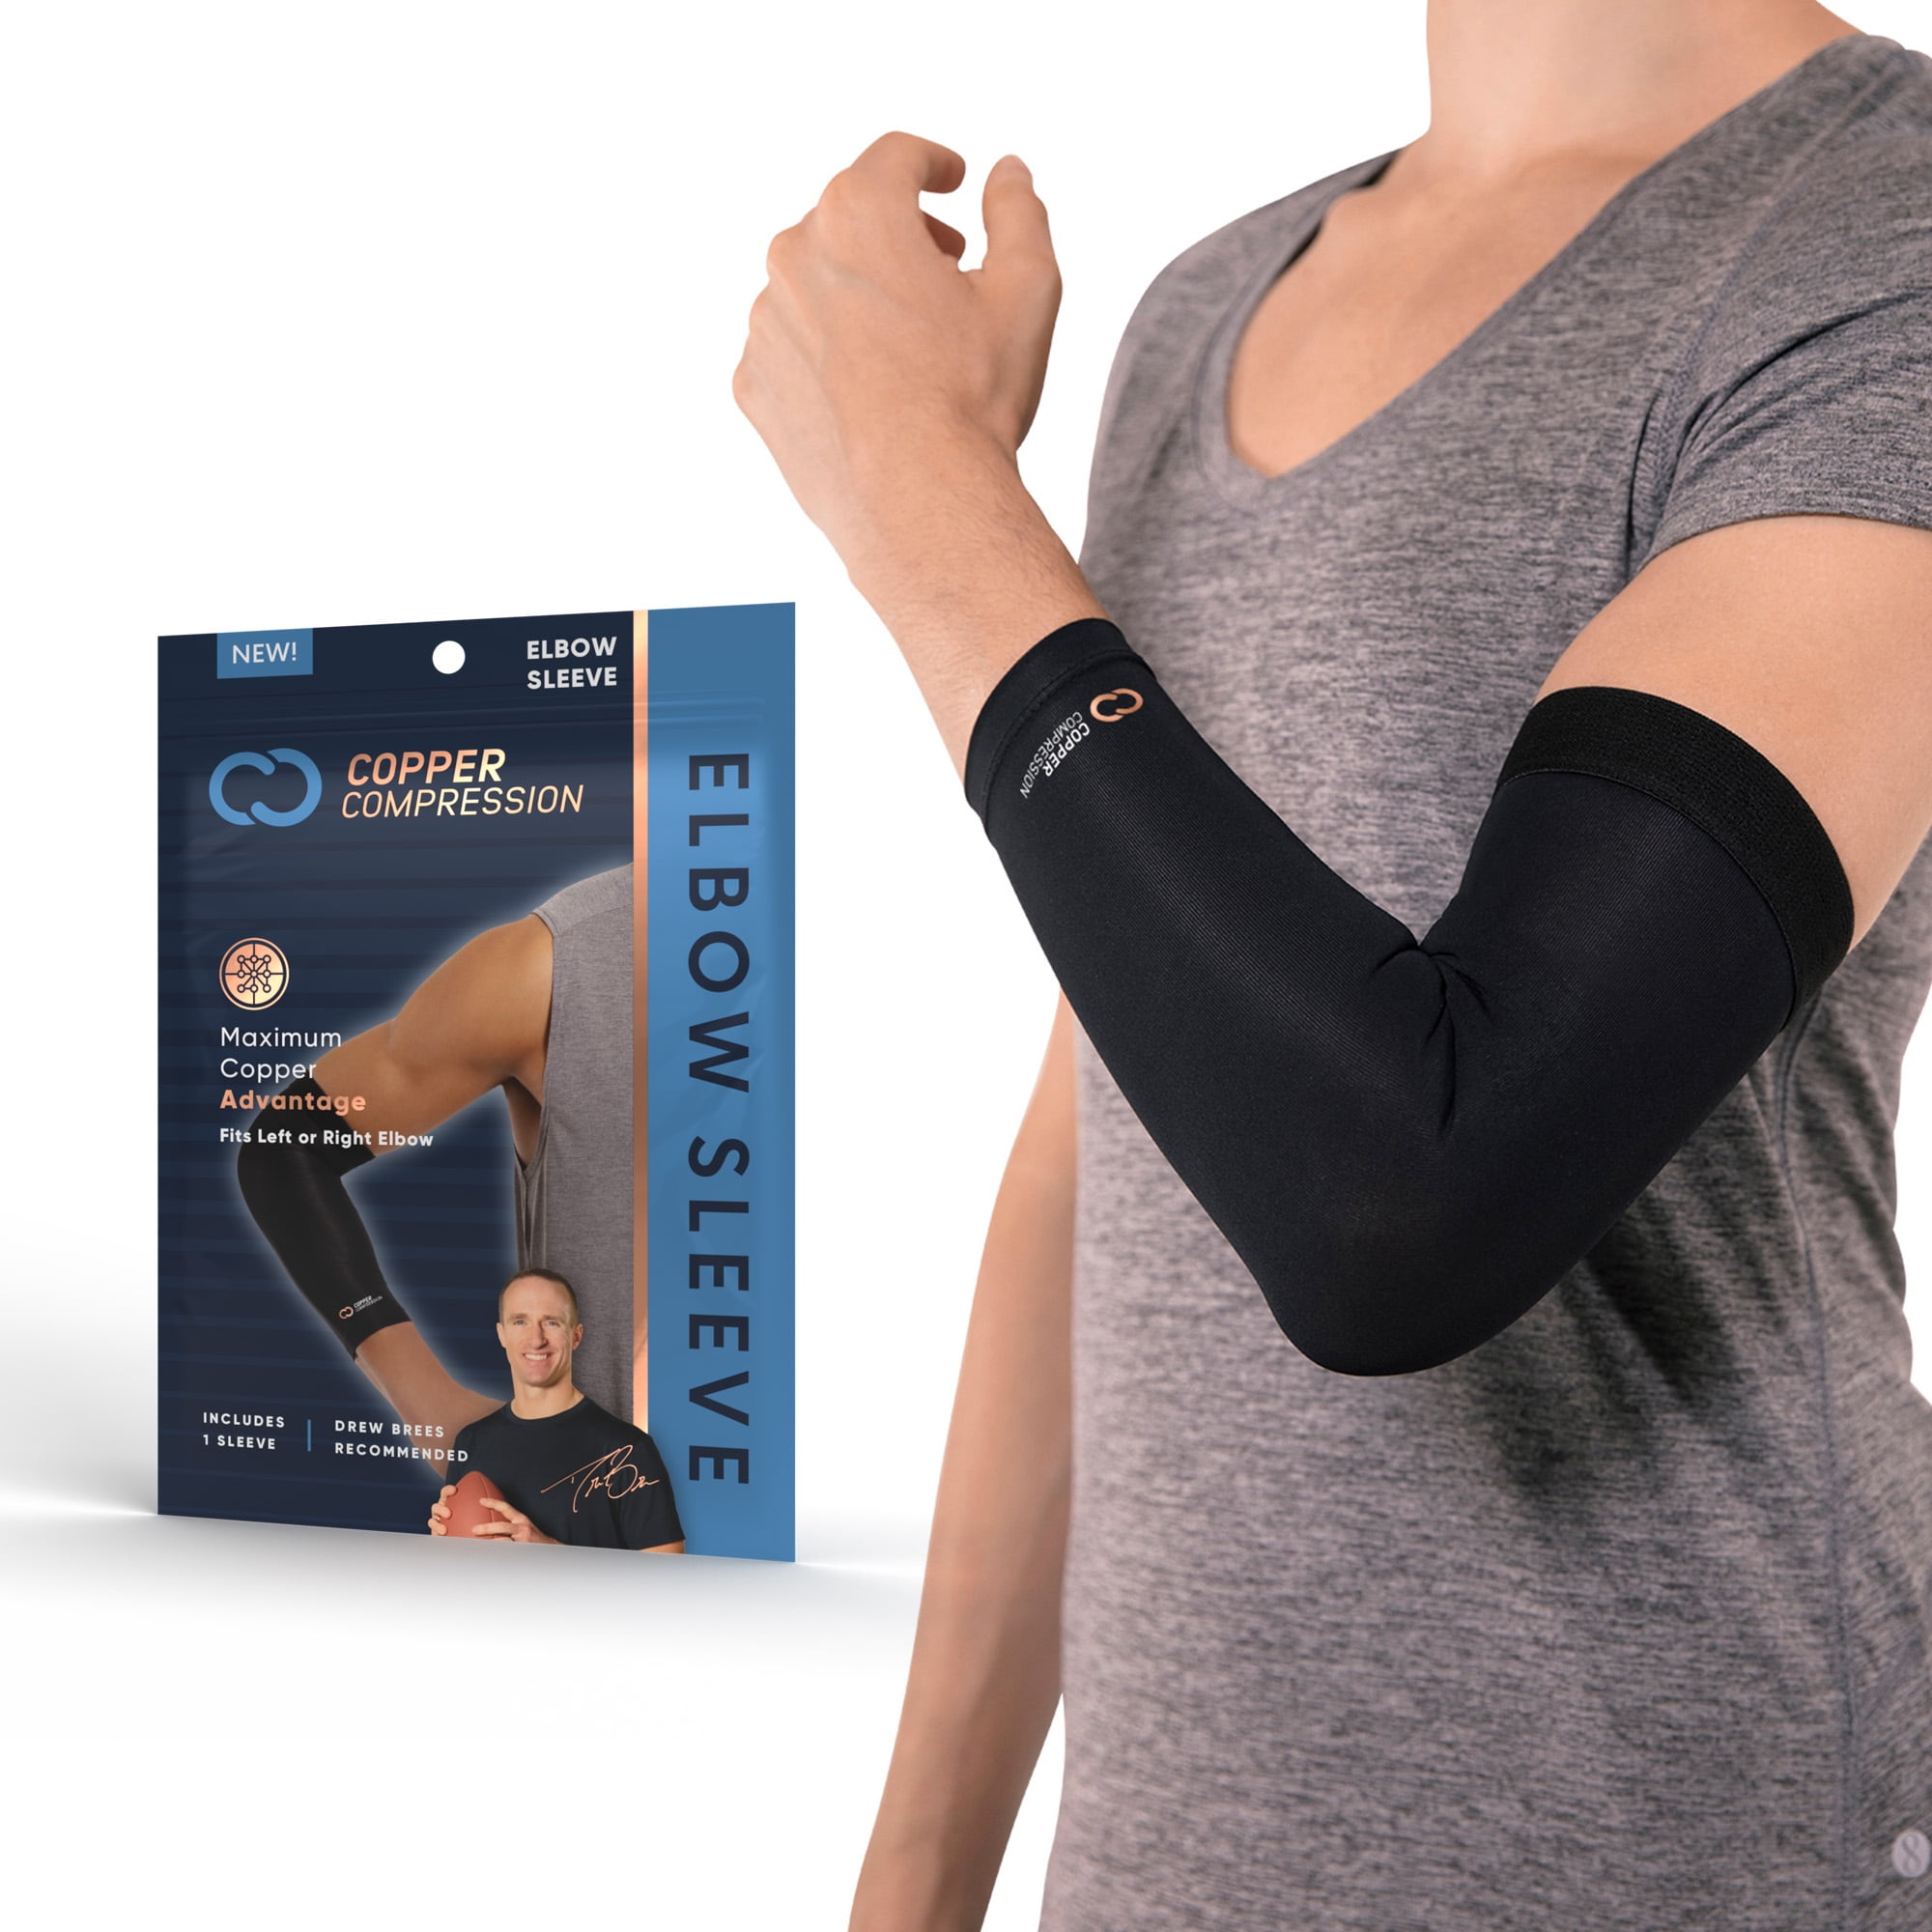 Details about   Compression Elbow Support Thigh Arm Sleeve Brace Anti Sun UV For Men Women M-2XL 